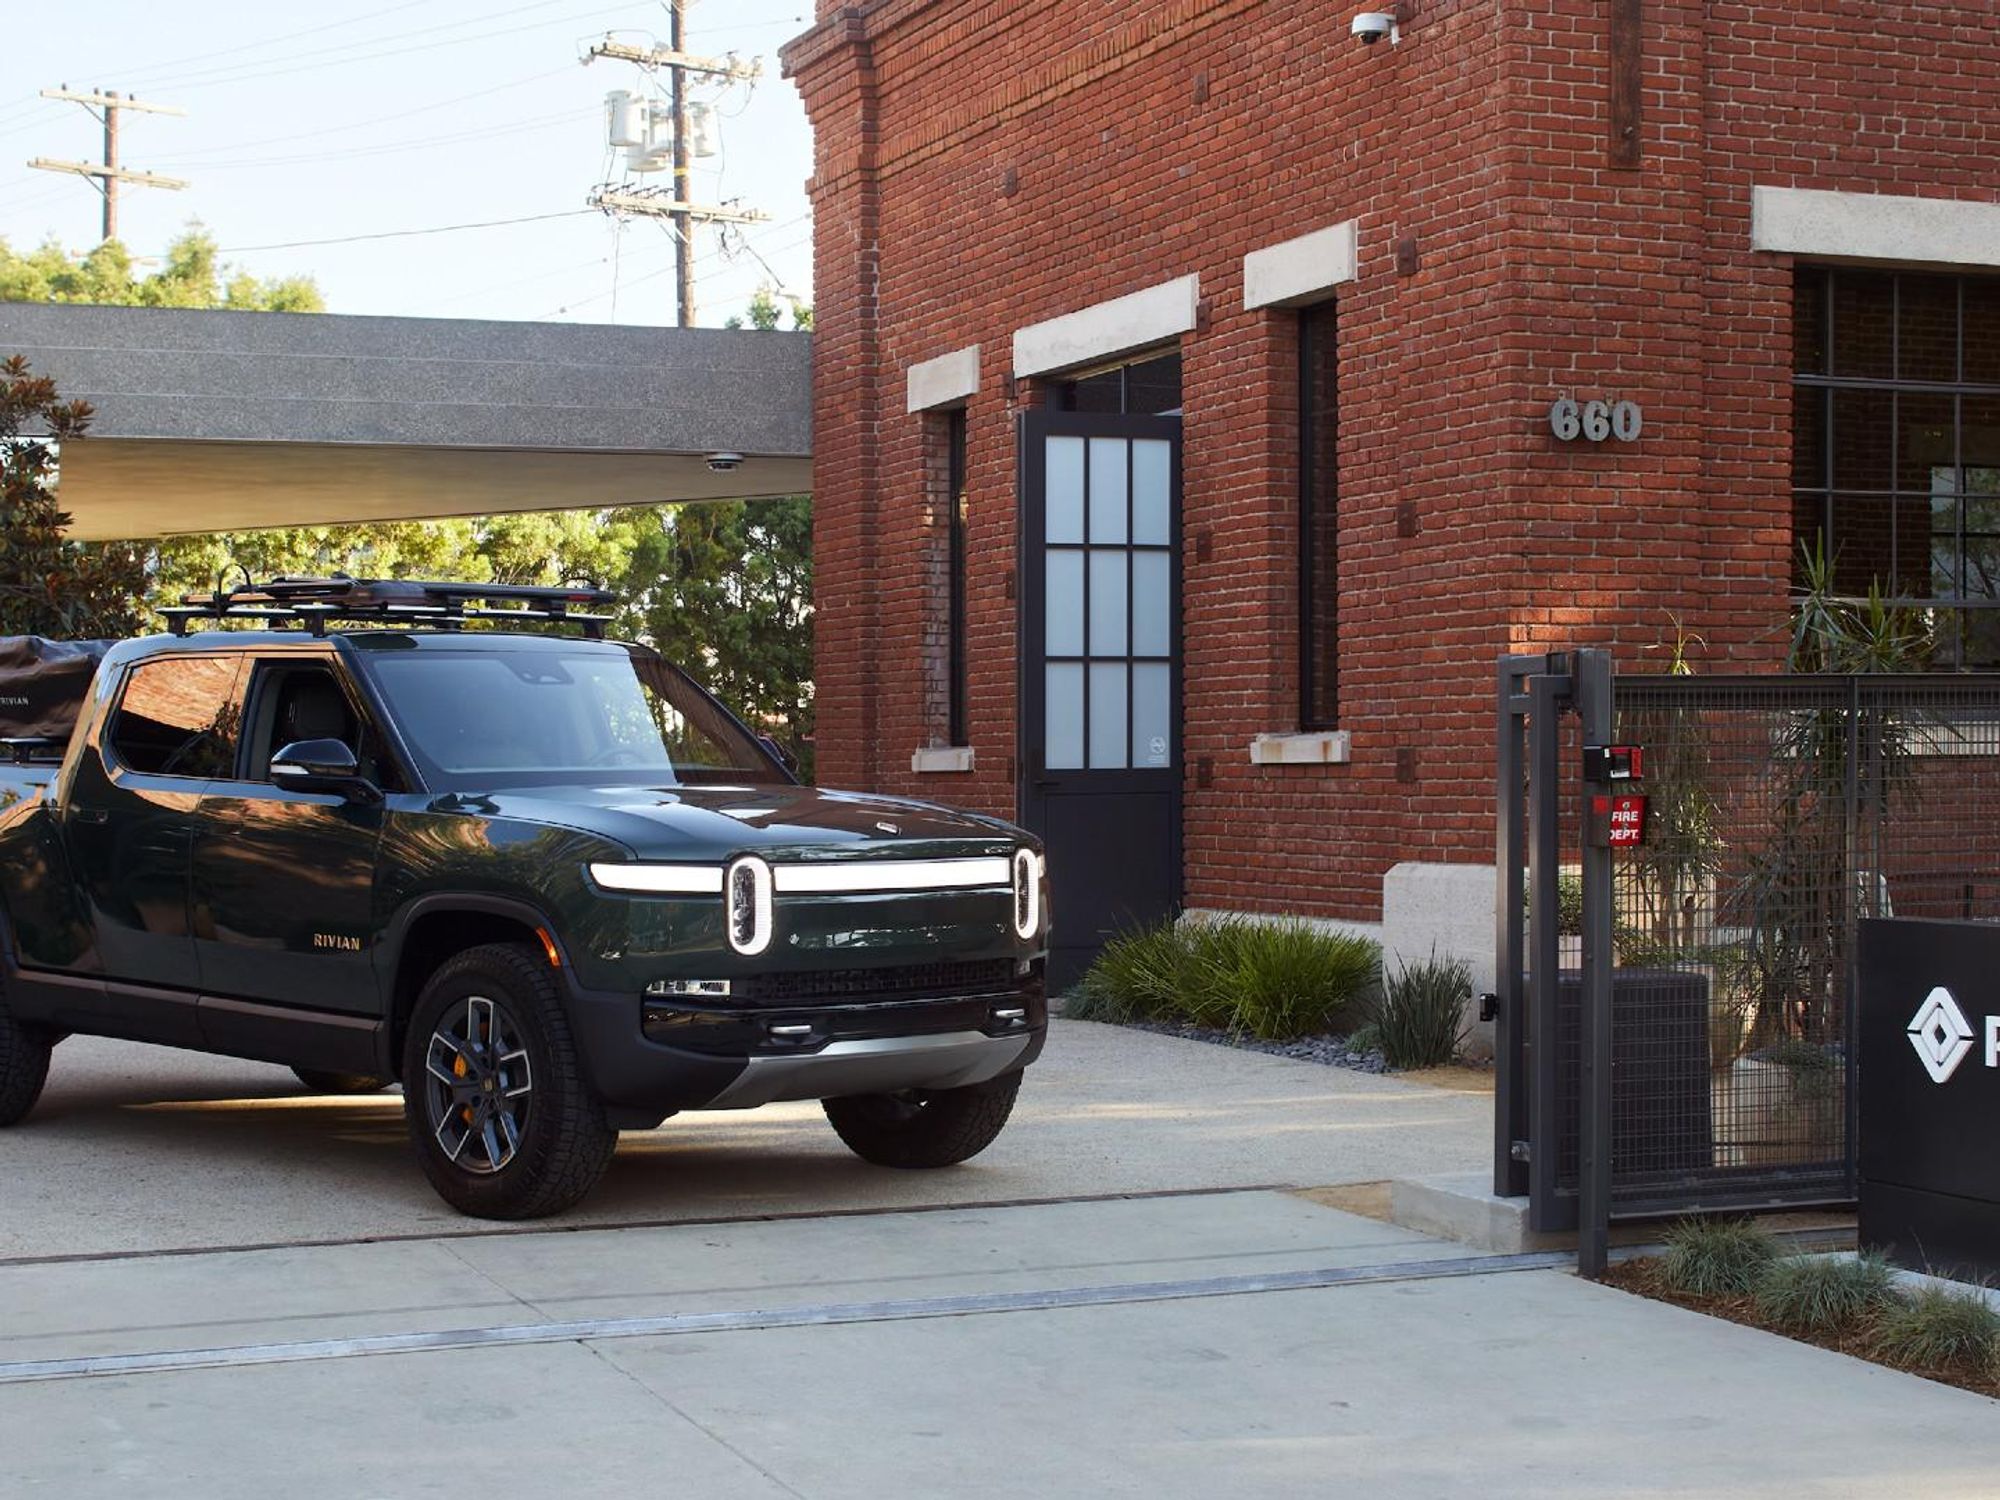 Investing in Rivian: George Soros Increases His Stake in Electric Vehicle Start-up as Stock Prices Remain Volatile